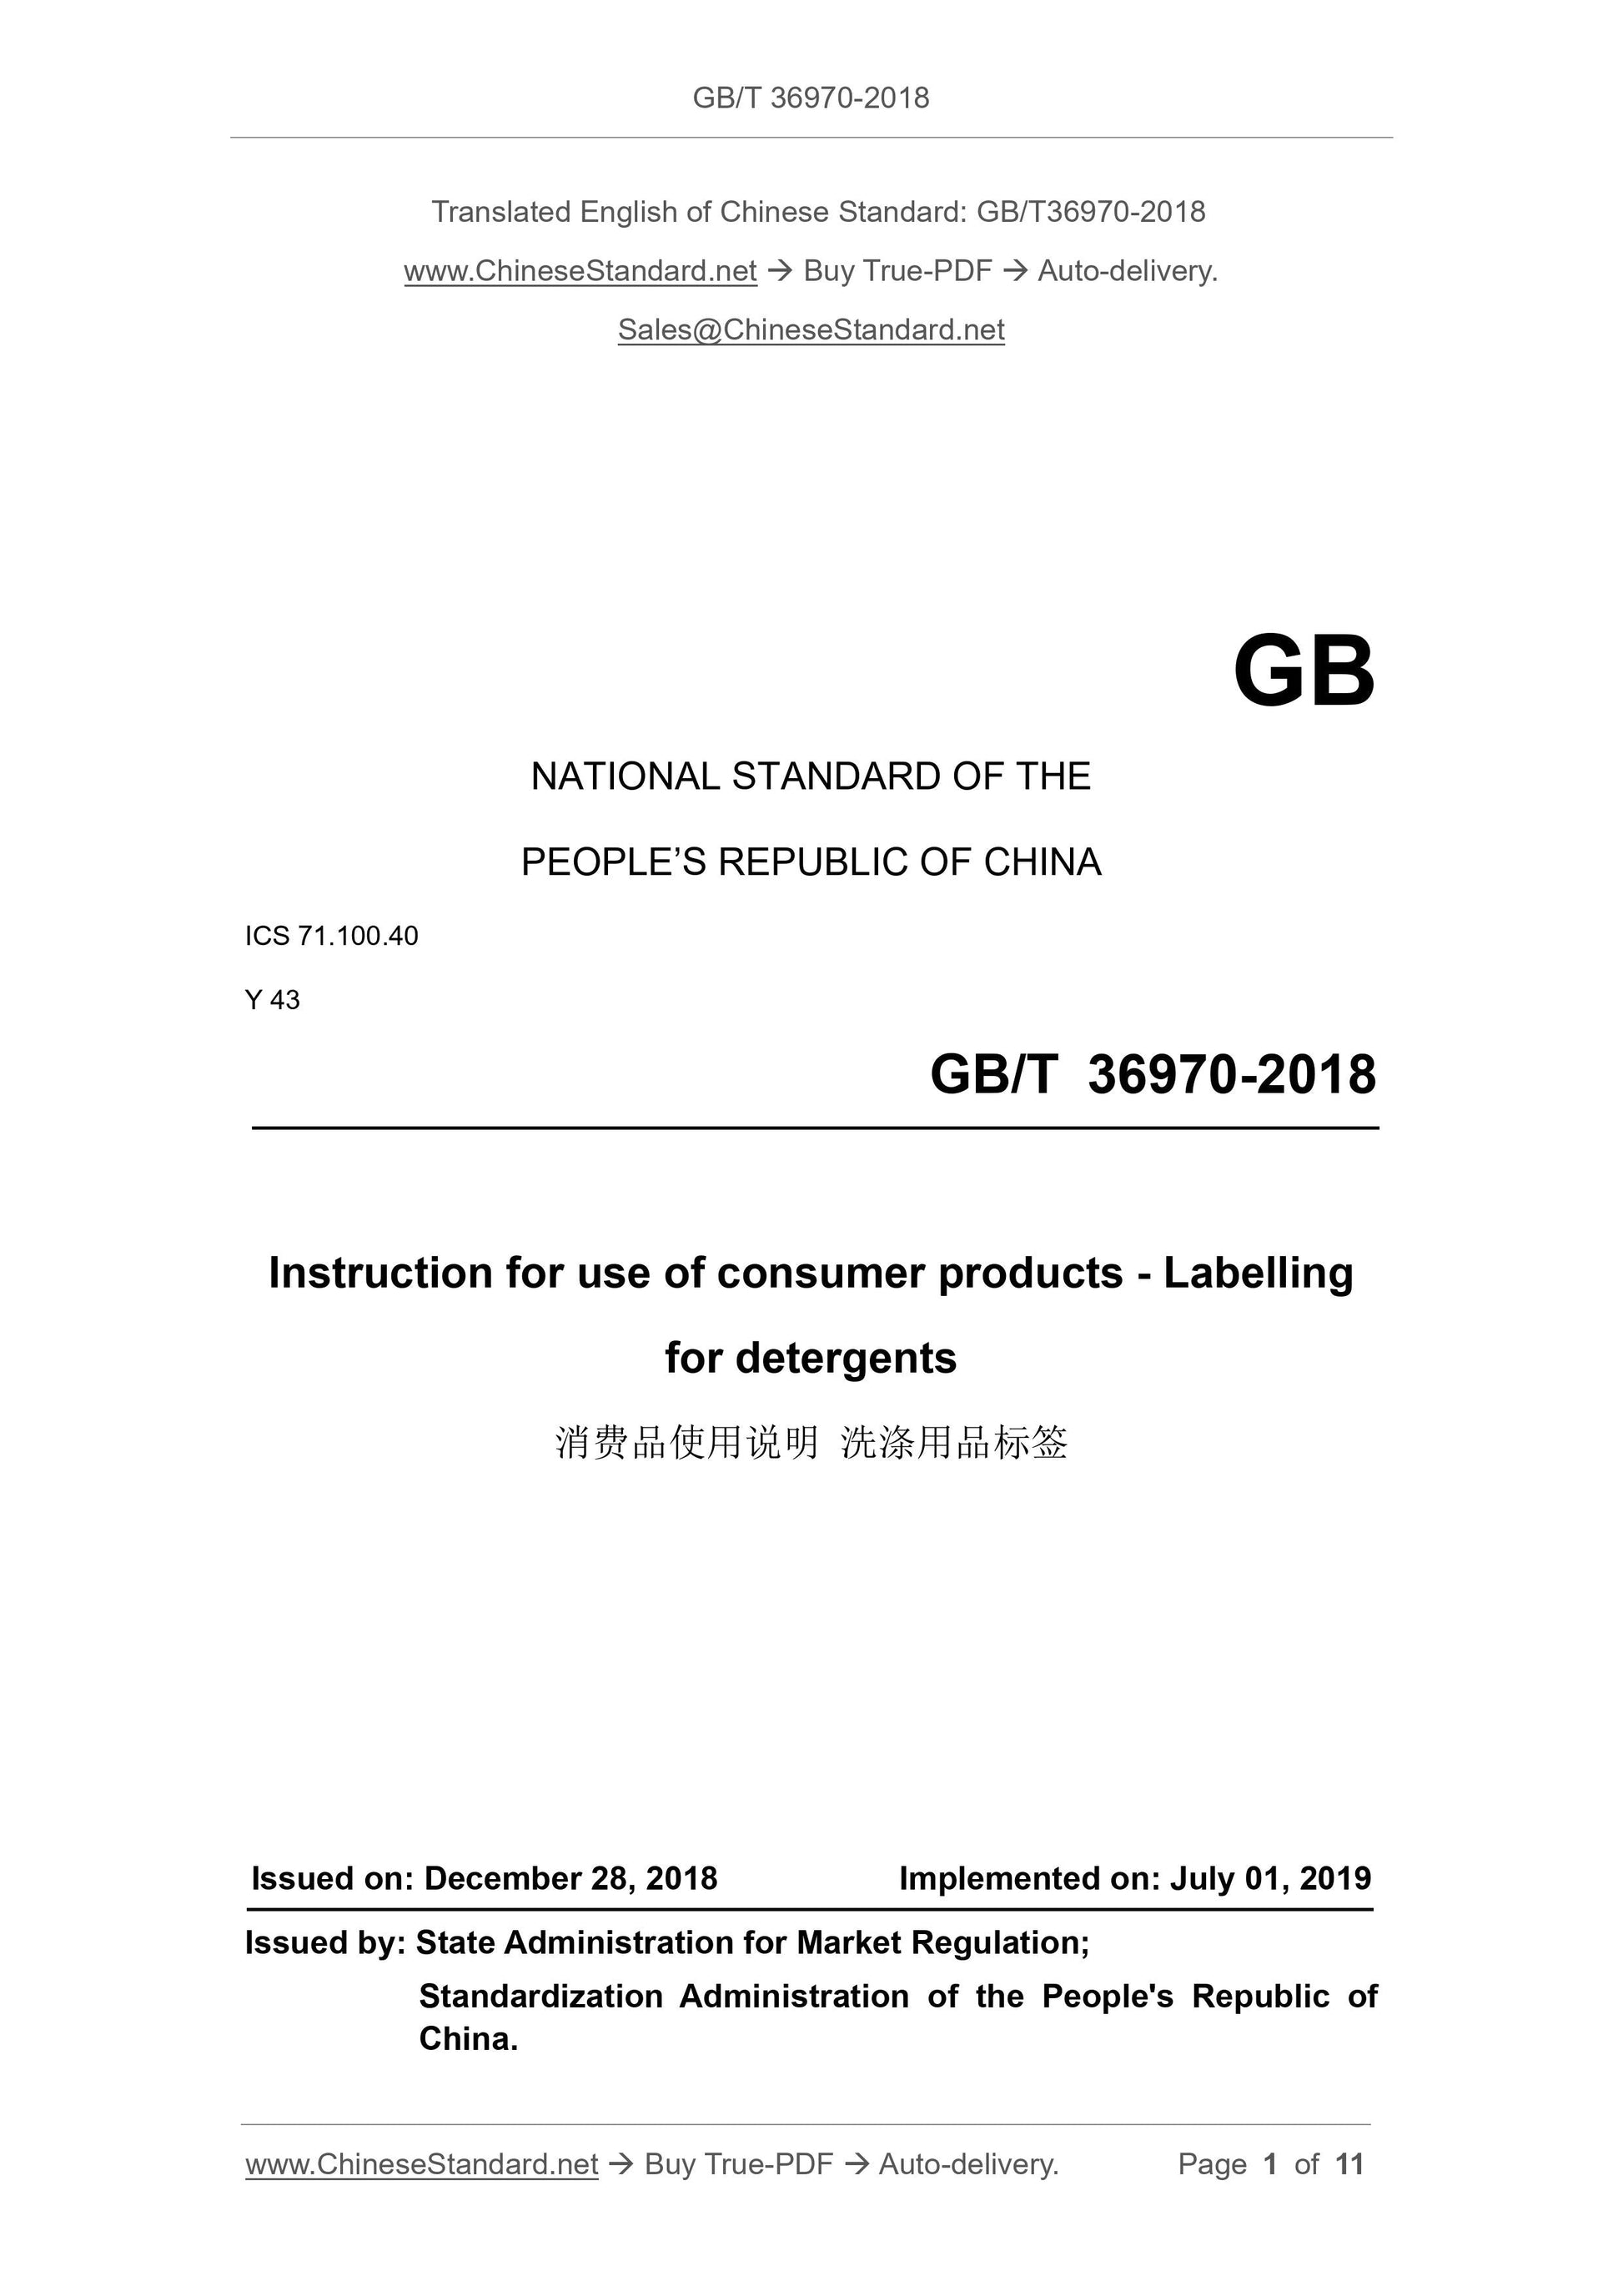 GB/T 36970-2018 Page 1